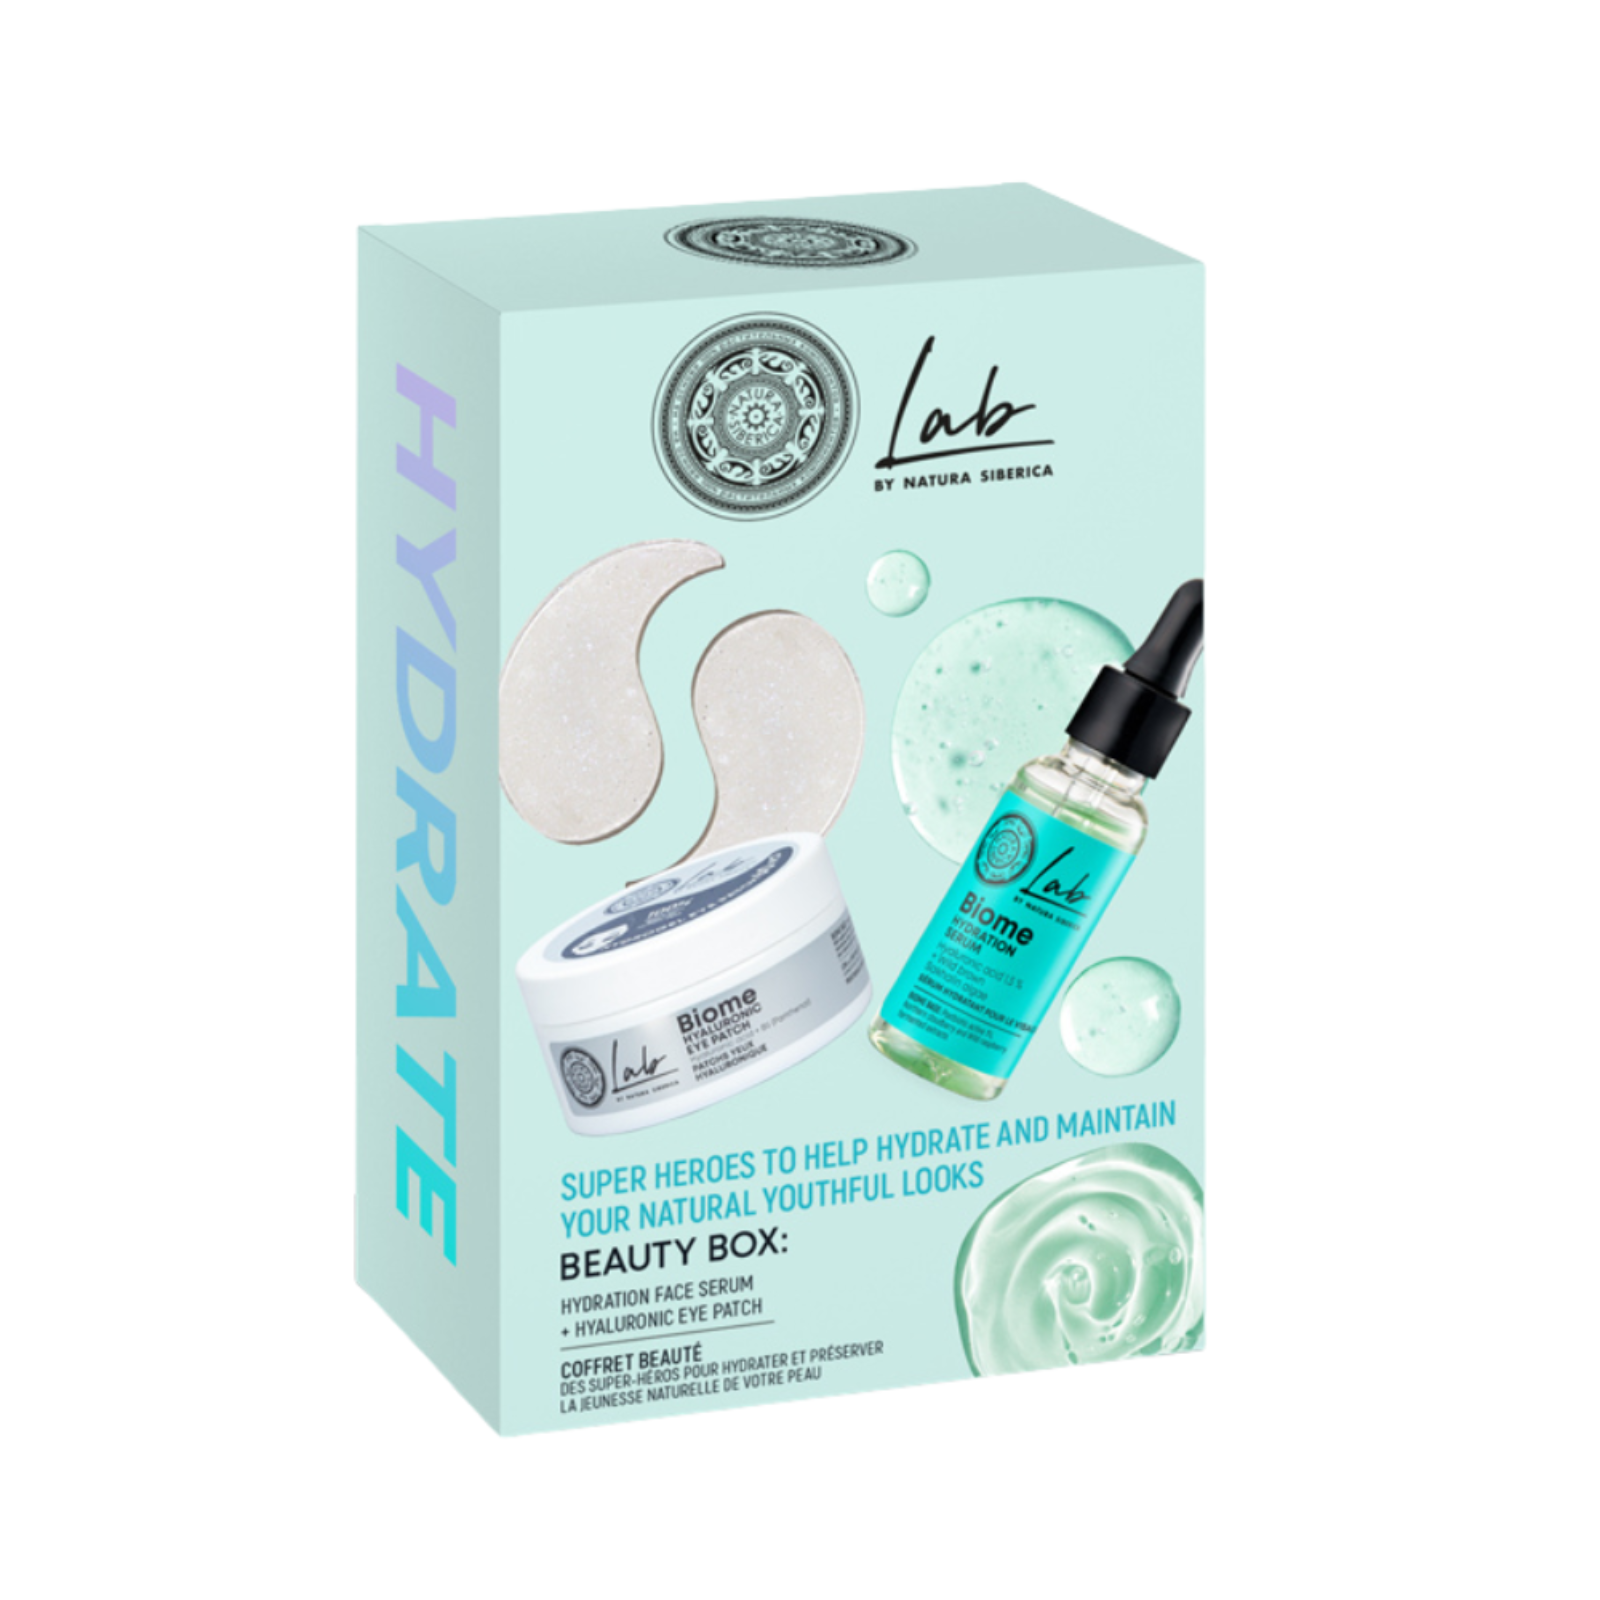 Lab by NS. Biome. Beauty Box Hydrate Gift Set